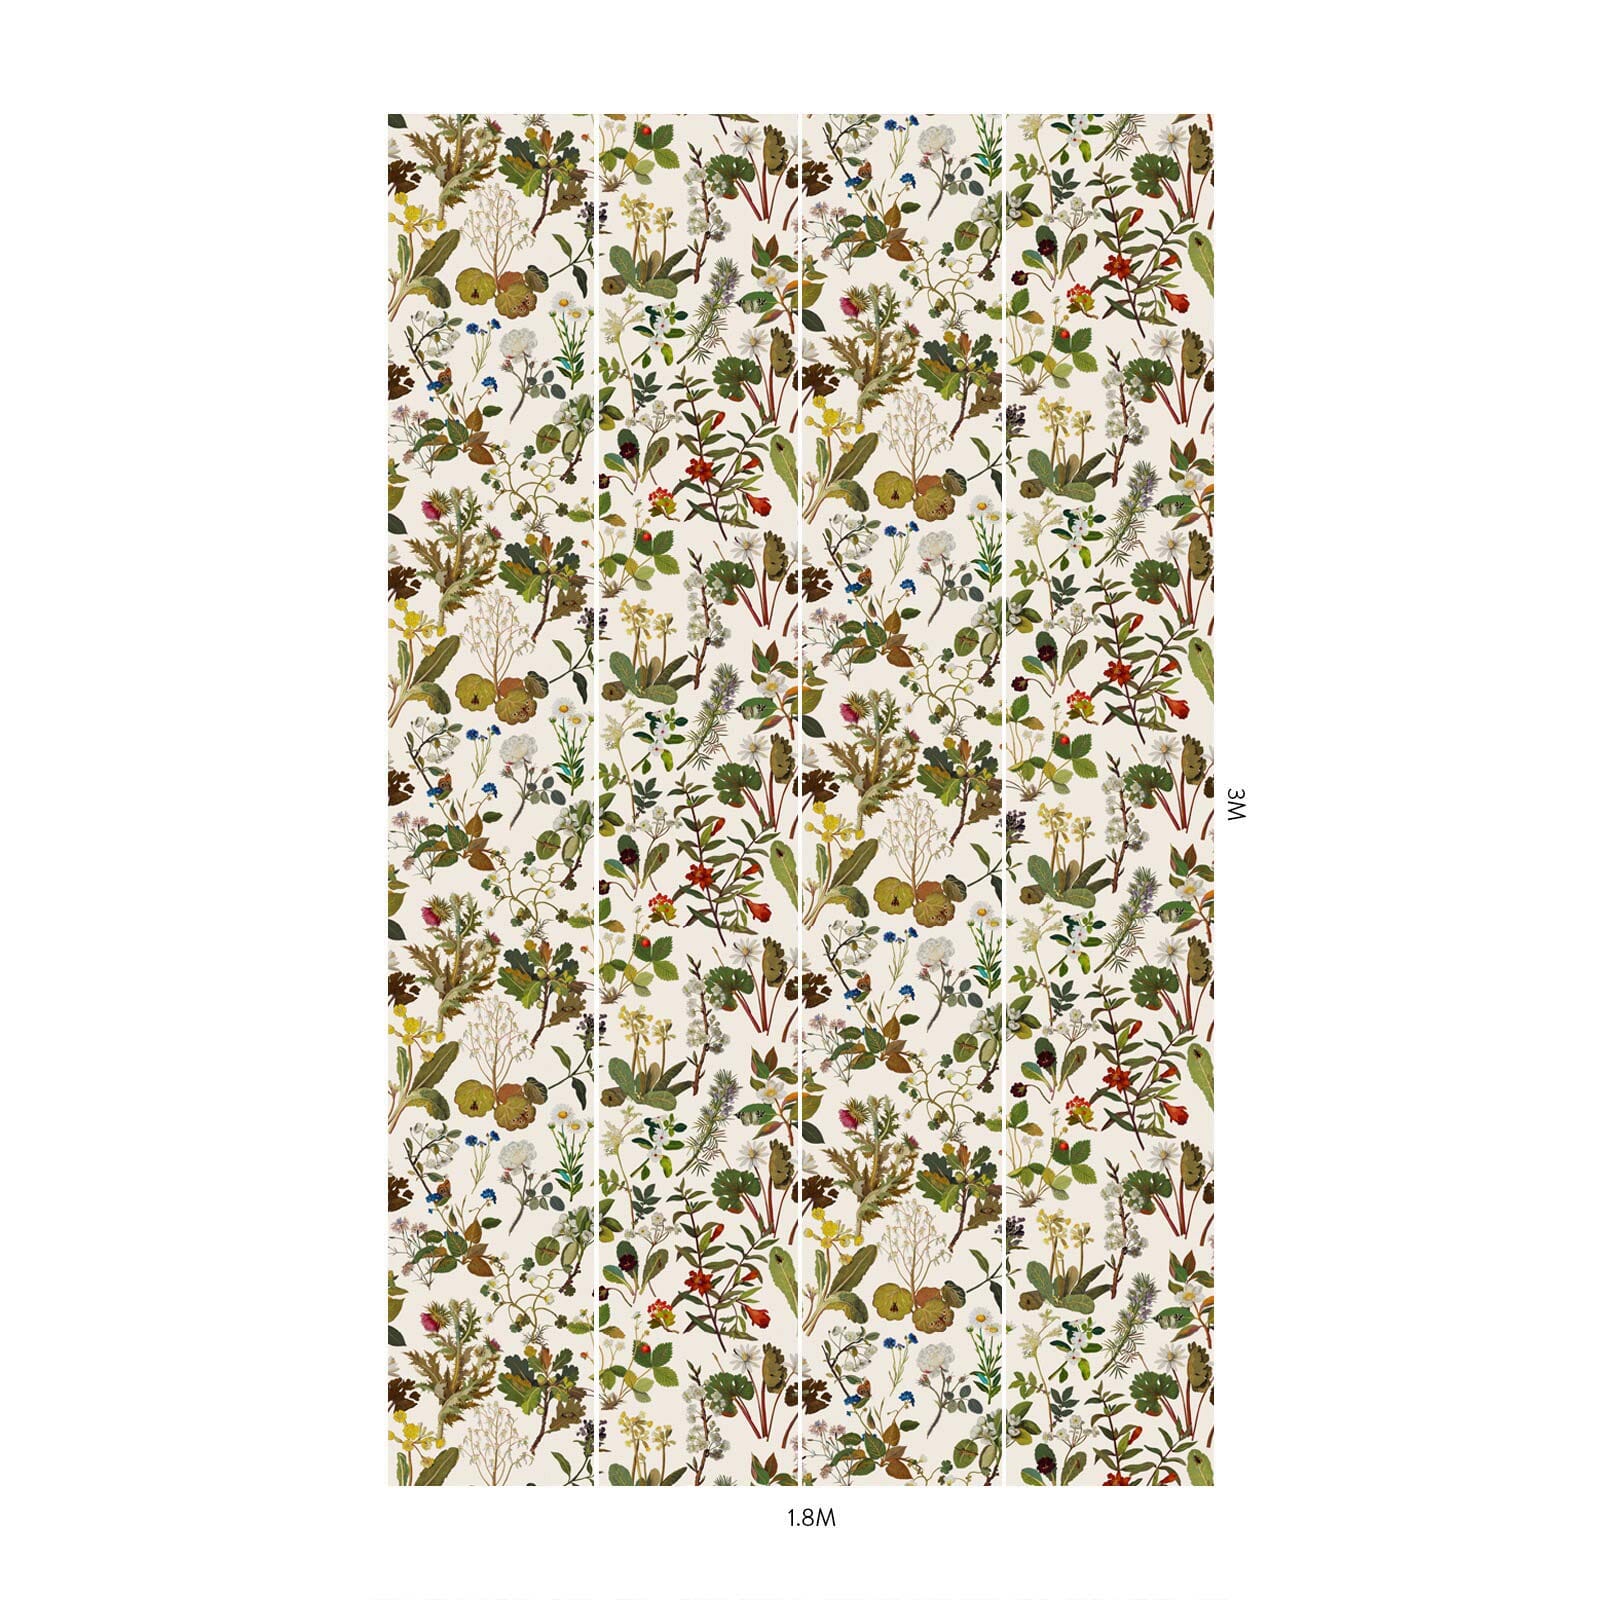 Art imitates nature across HERBARIUM: our reimagining of the exquisite floral mosaics by Mary Delany. The epitome of a late bloomer, the 18th century English artist began crafting her series of 985 extraordinarily detailed collages at the age of 72.